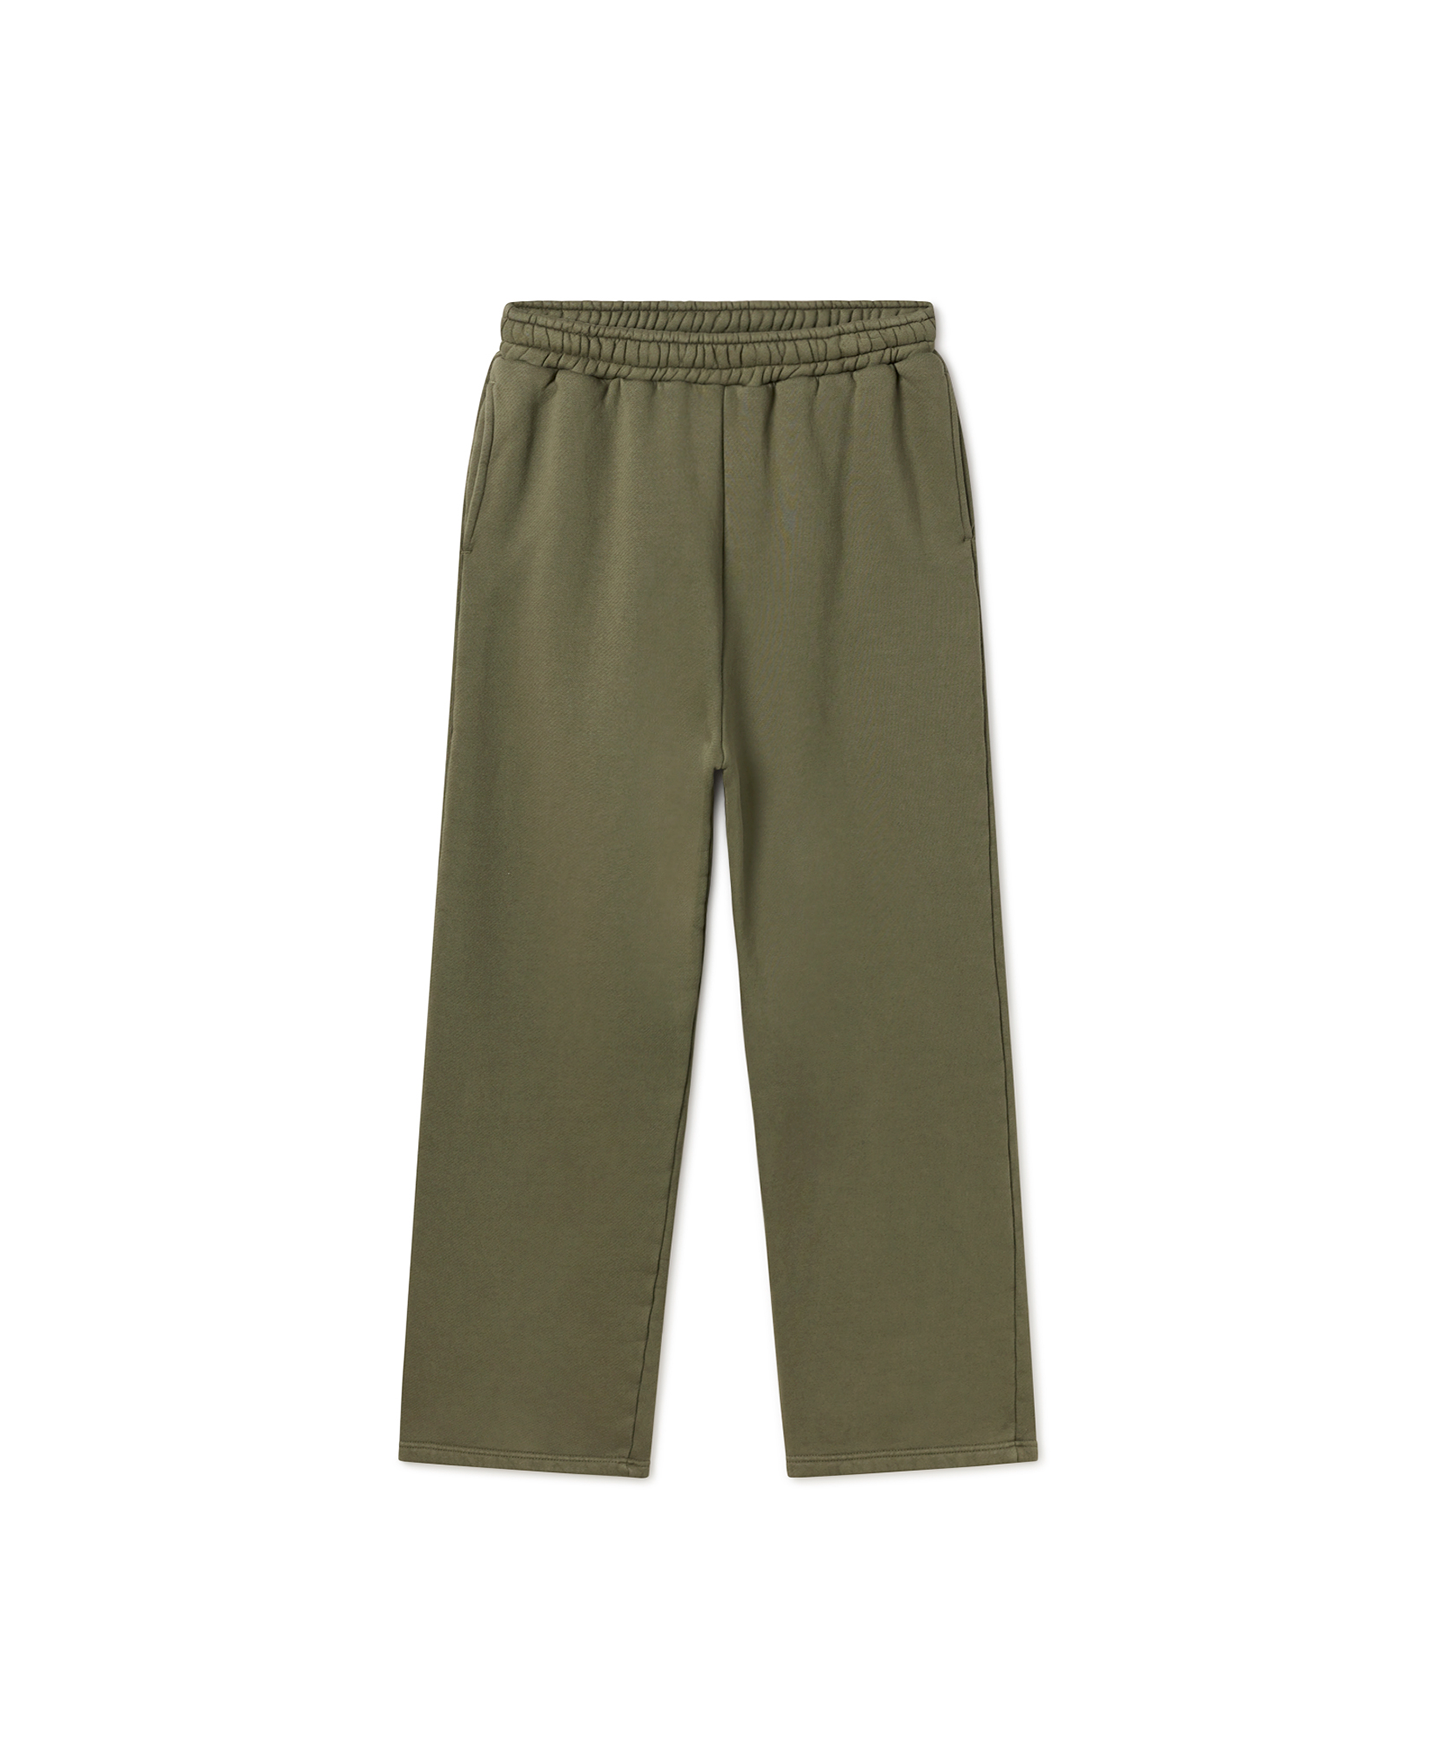 450 GSM 'Army Olive' Straight-leg Pants